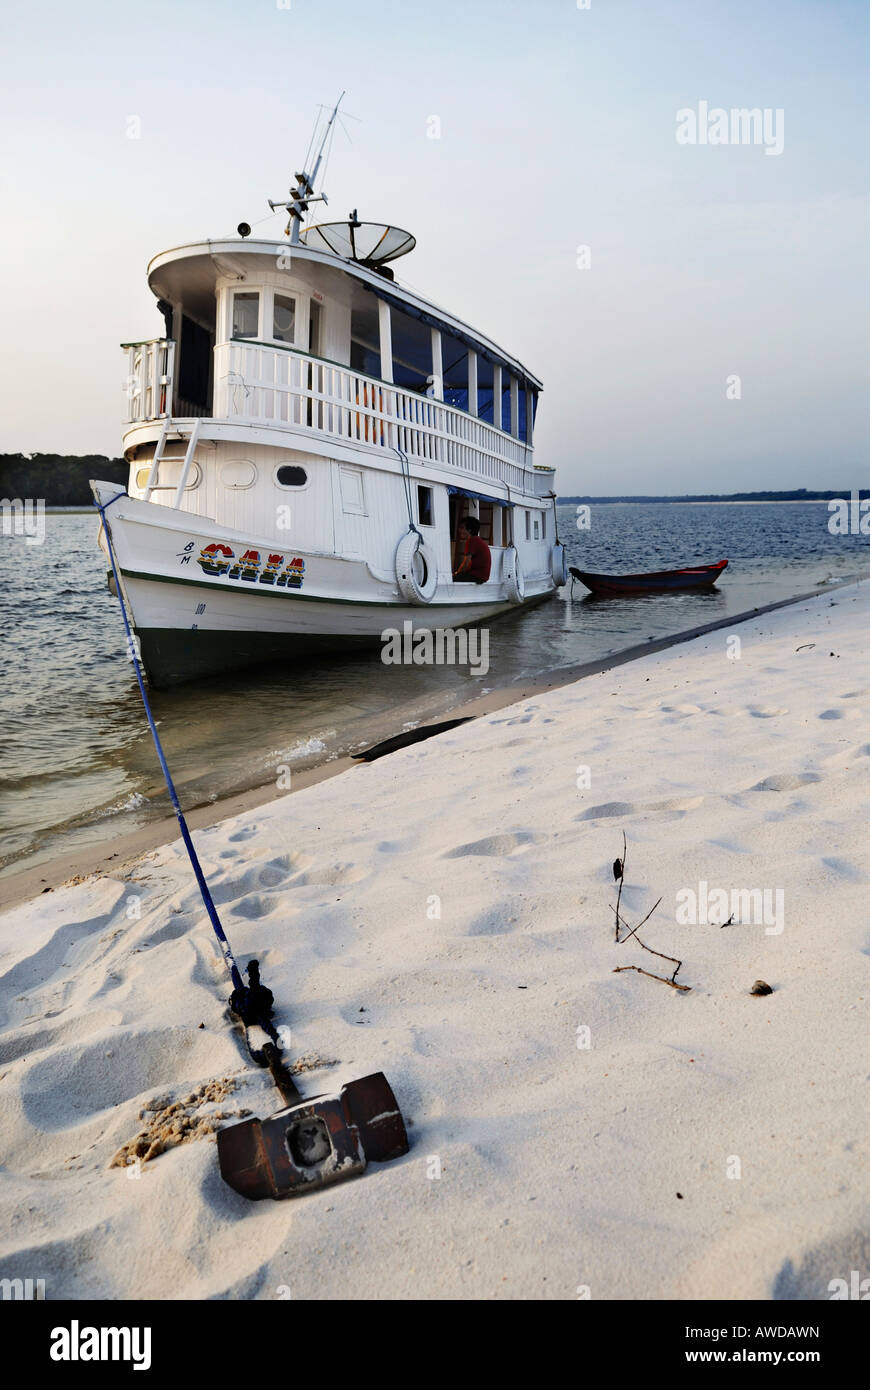 Page 2 - River Anker High Resolution Stock Photography and Images - Alamy